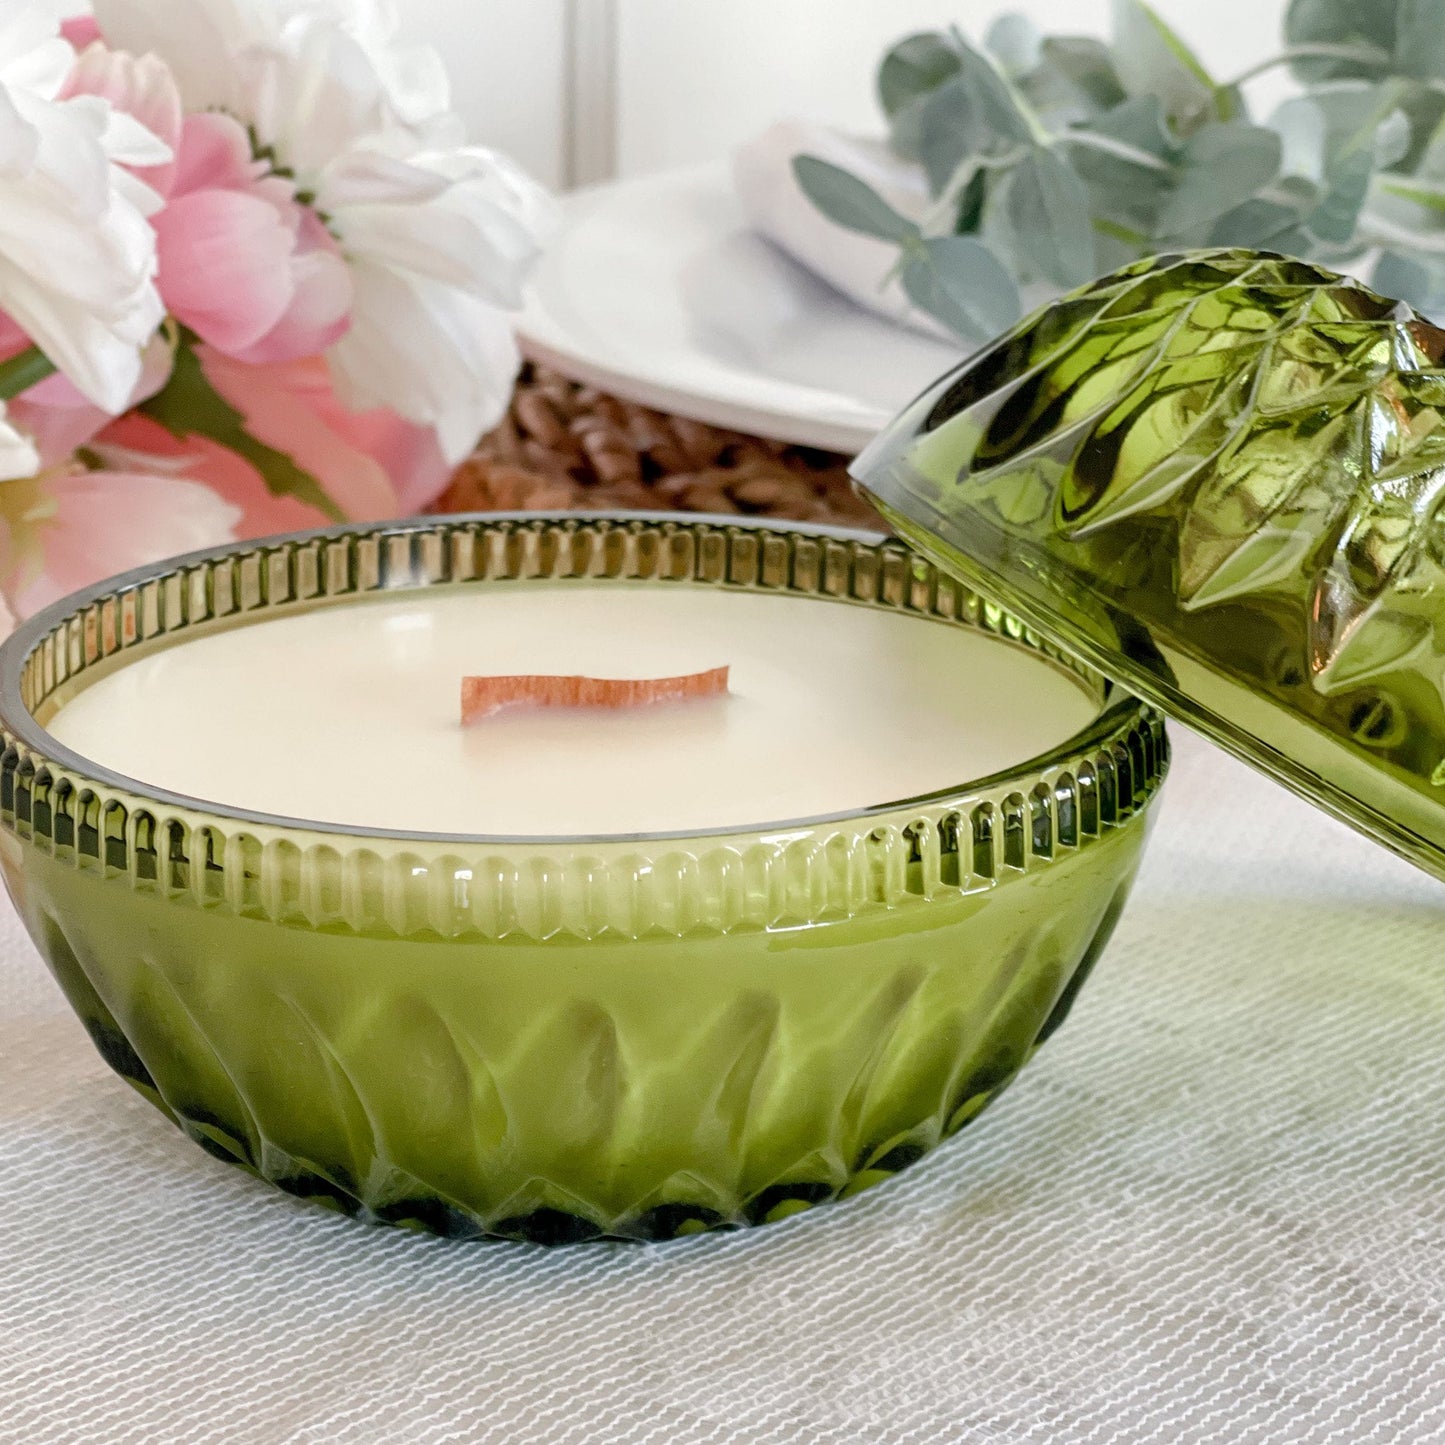 Cypress & Bayberry Holiday Soy Candle in Vintage Pumpkin Candy Dish